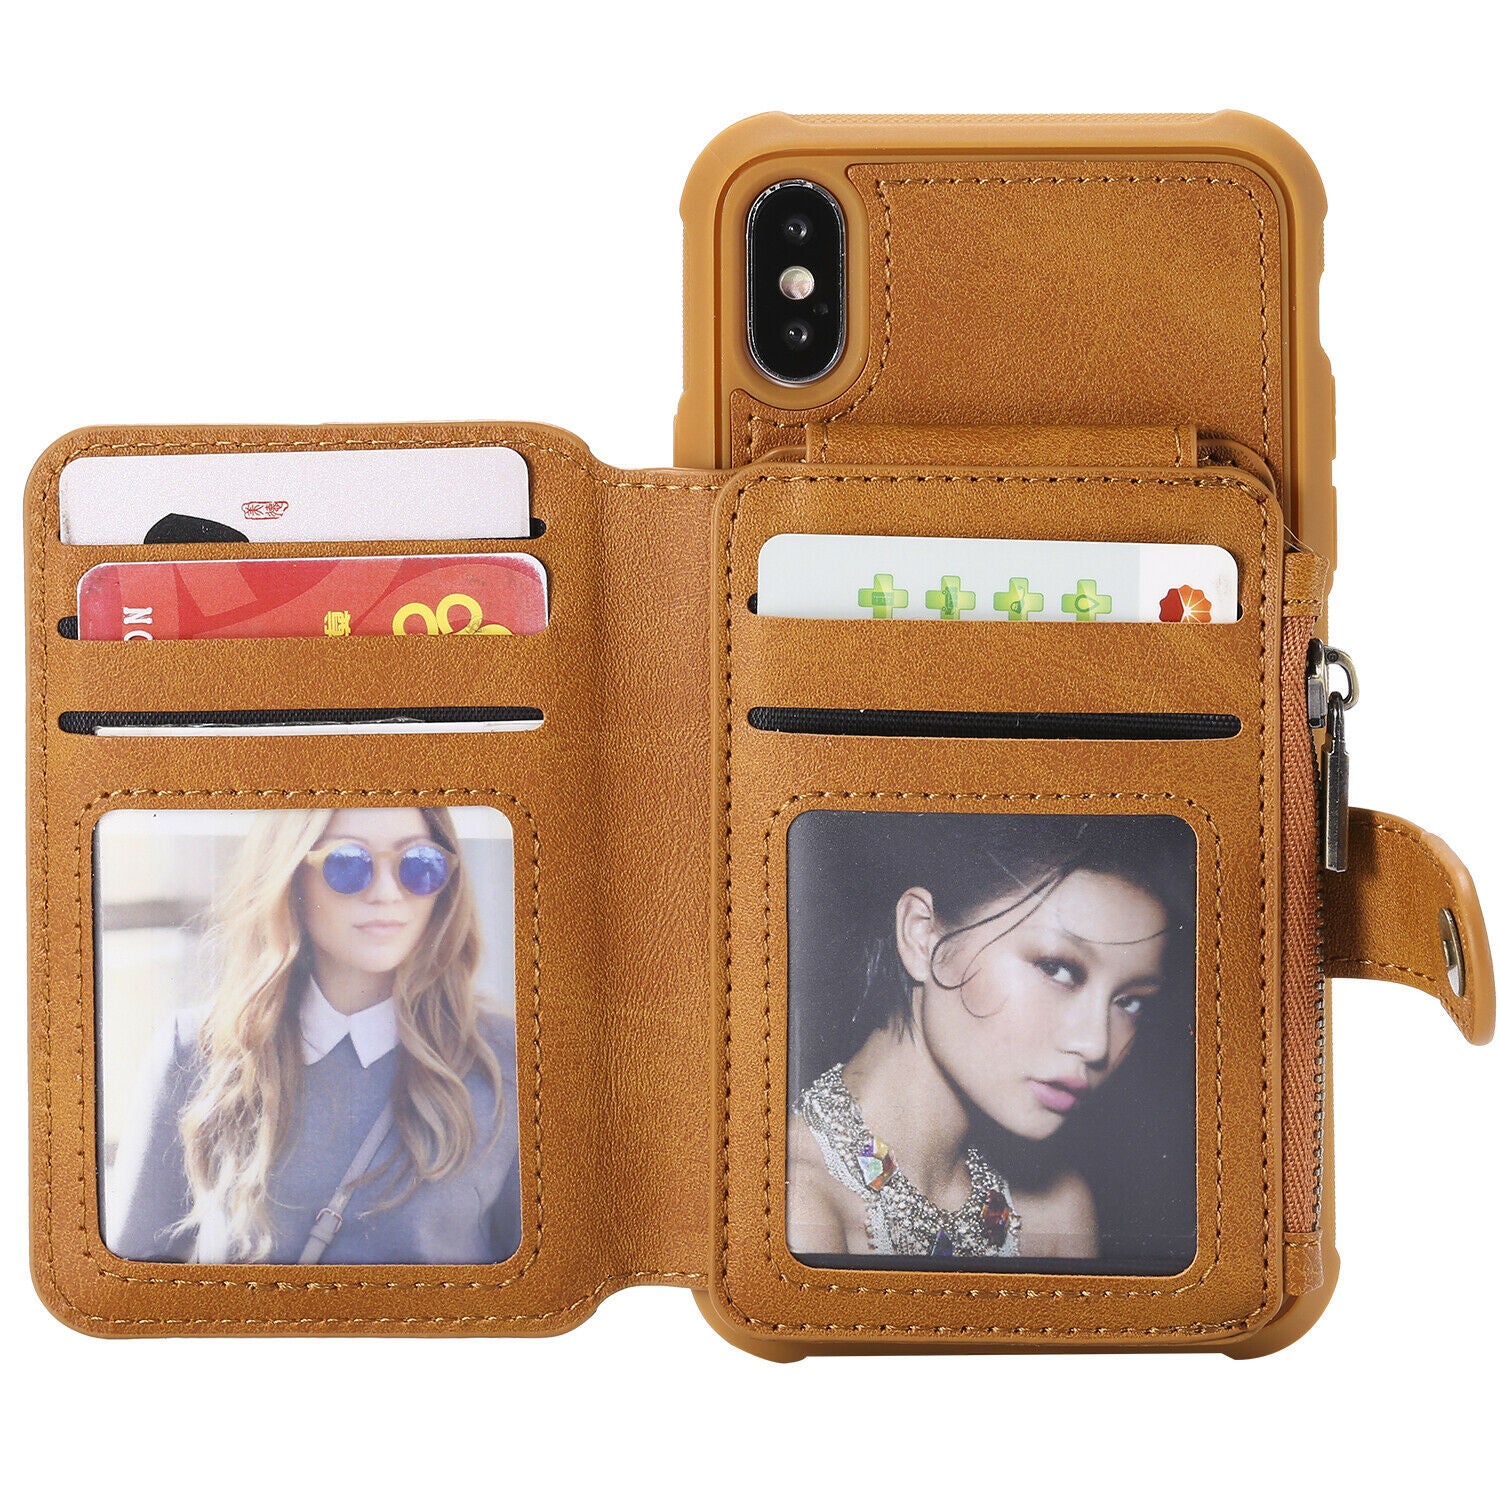 Zipper Multifunction Wallet Card Slot Leather Stand Case For iPhone